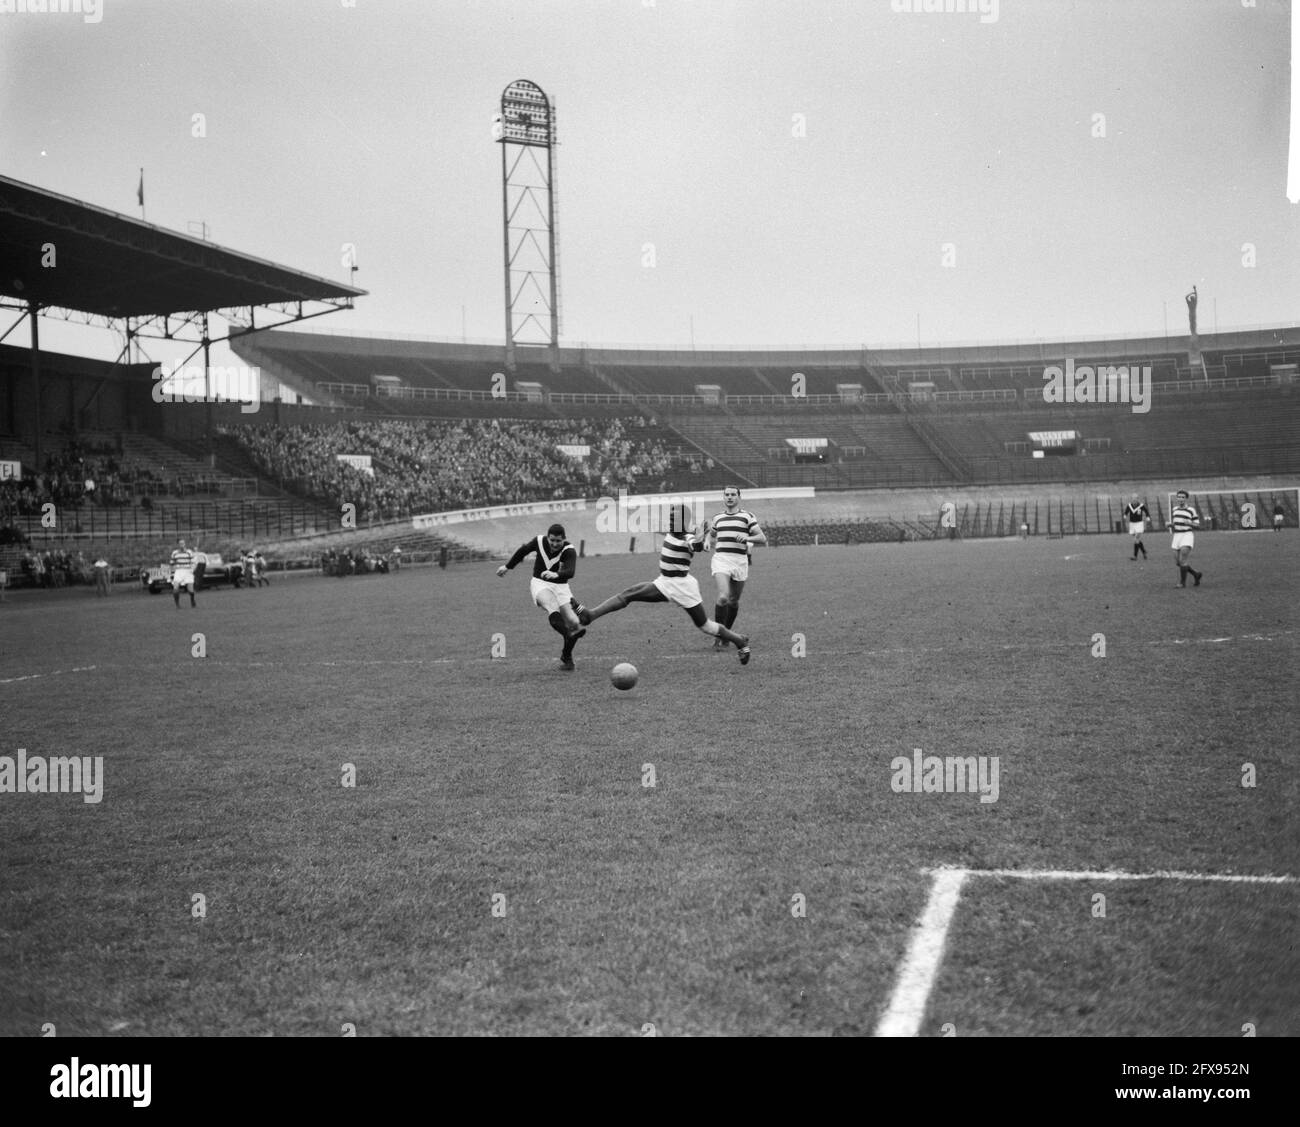 Blauw-Wit against Sportclub Enschede 1-1, December 3, 1961, The Netherlands, 20th century press agency photo, news to remember, documentary, historic photography 1945-1990, visual stories, human history of the Twentieth Century, capturing moments in time Stock Photo